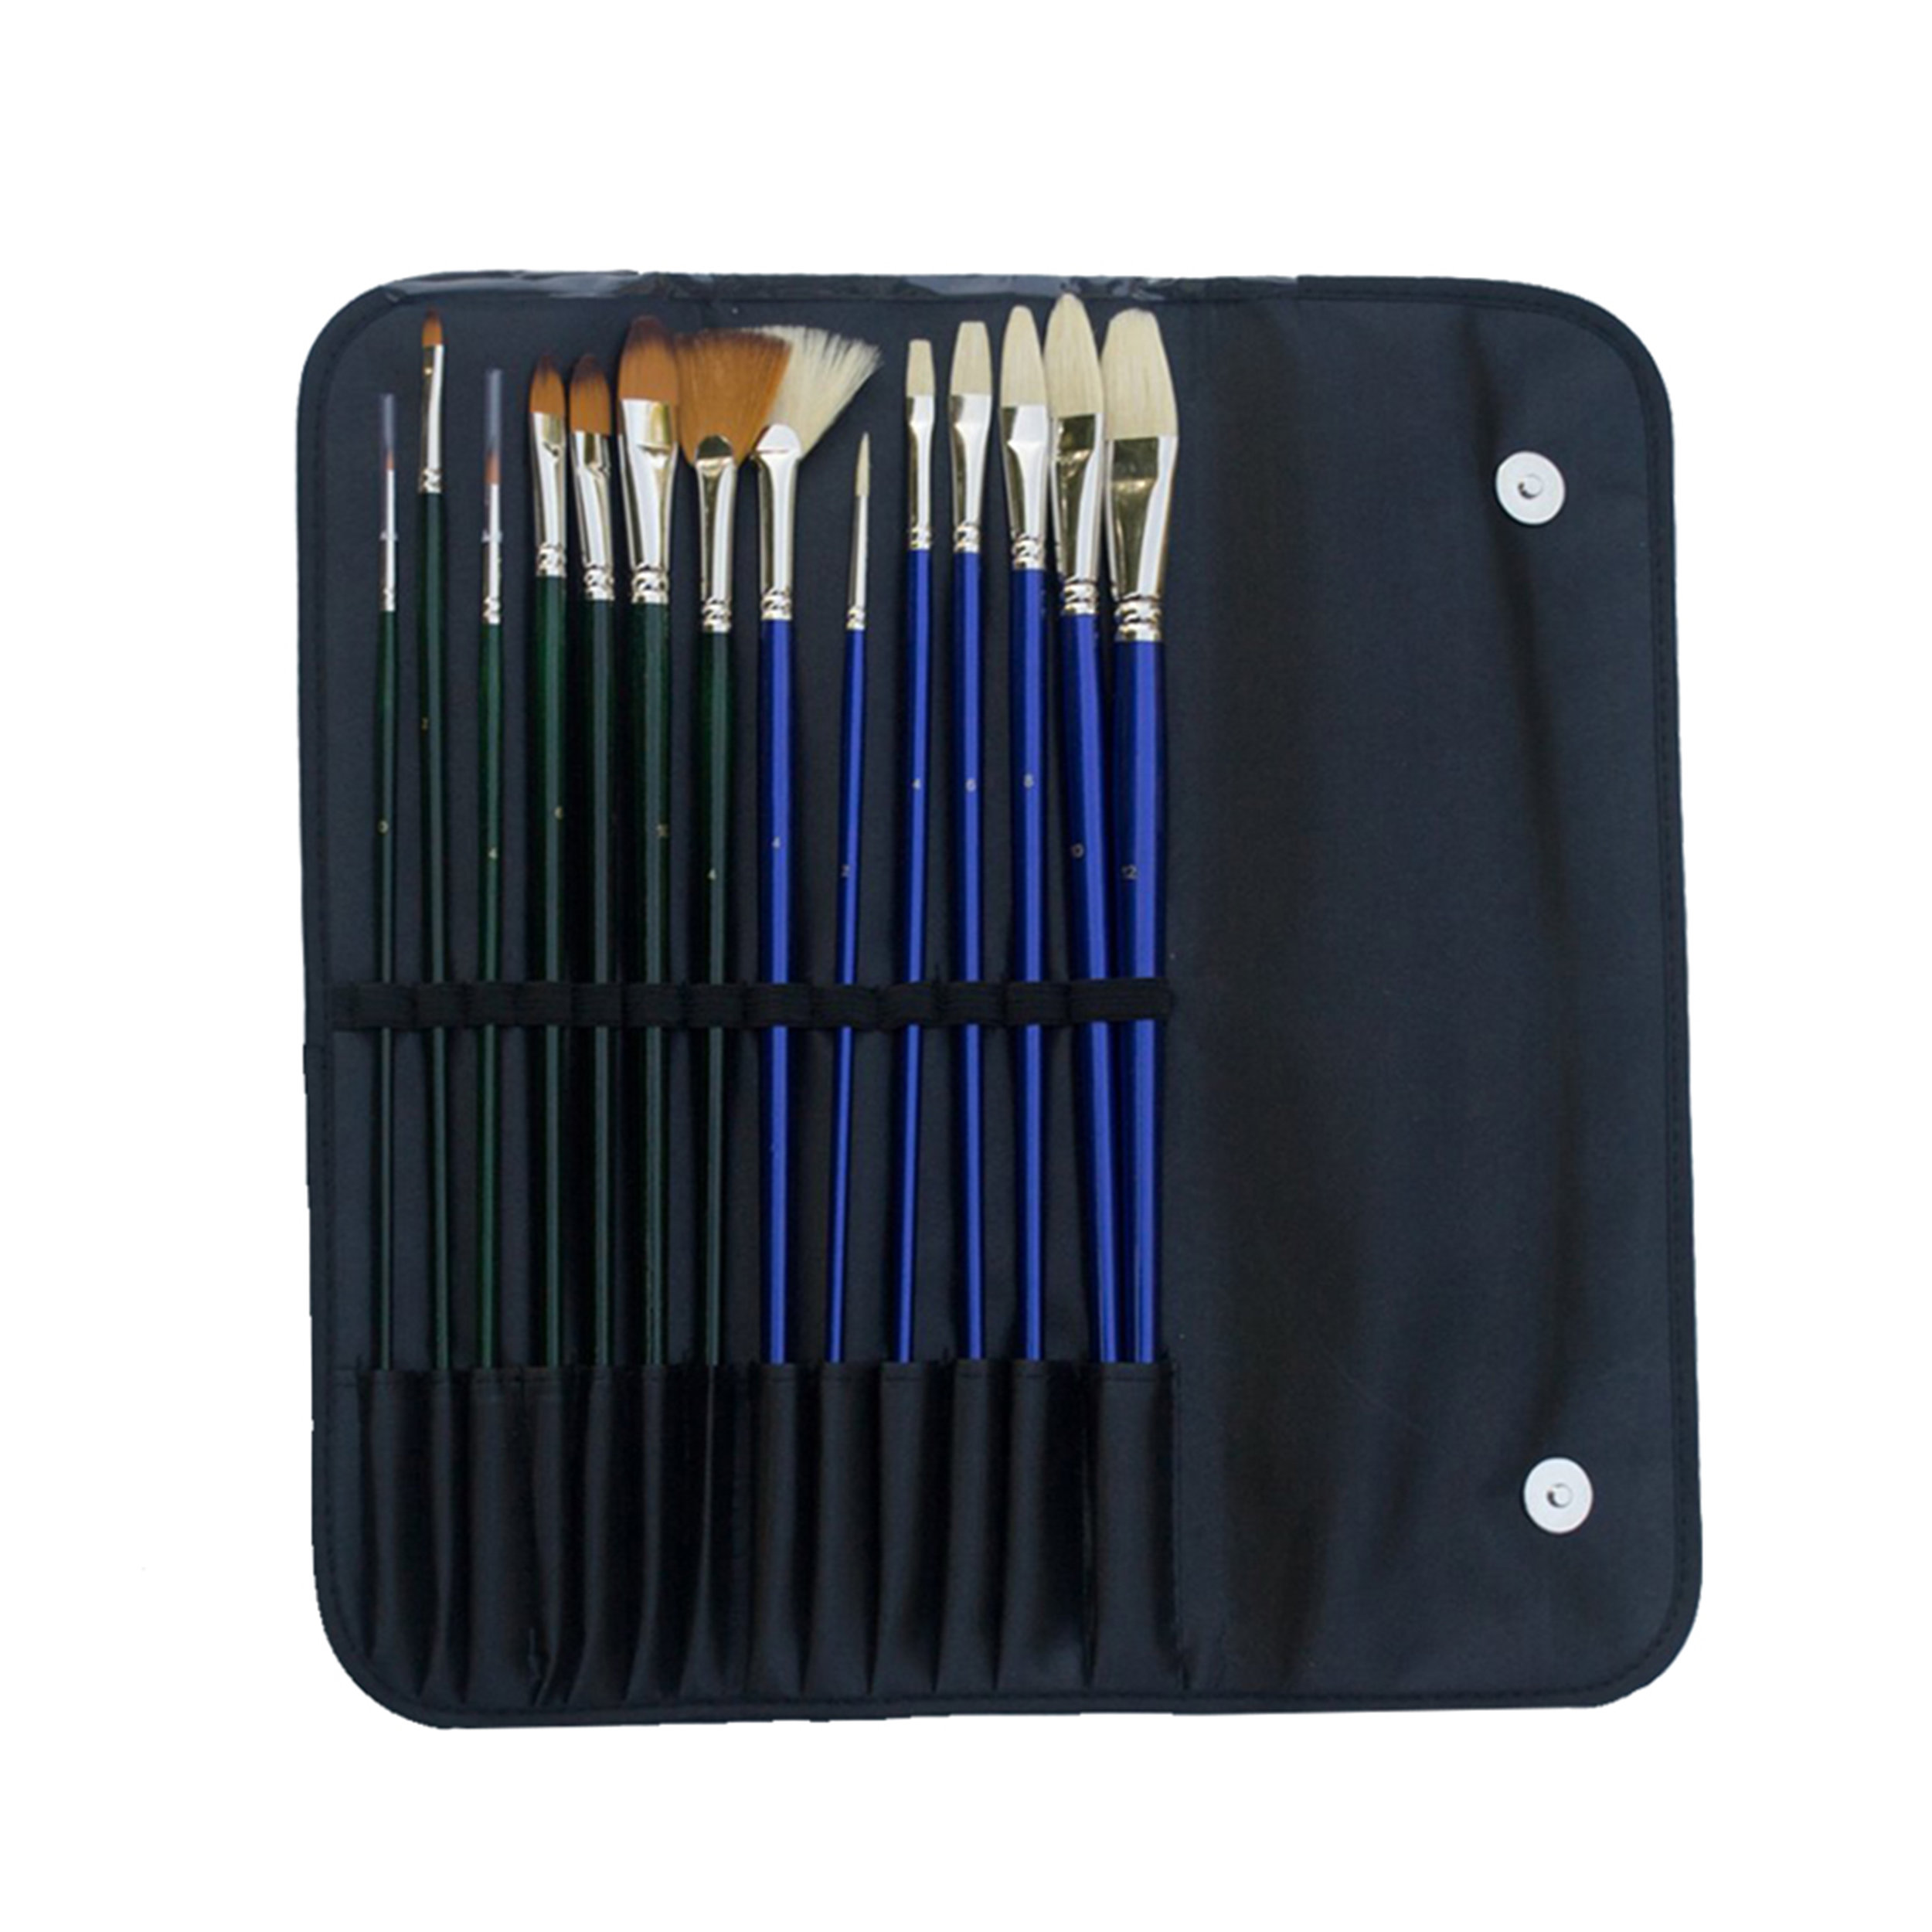 Jerry Q Art 12 Pcs Detail Paint Brushes Golden Synthetic Hair High Performance for Oil Acrylic and Watercolor JQ-503